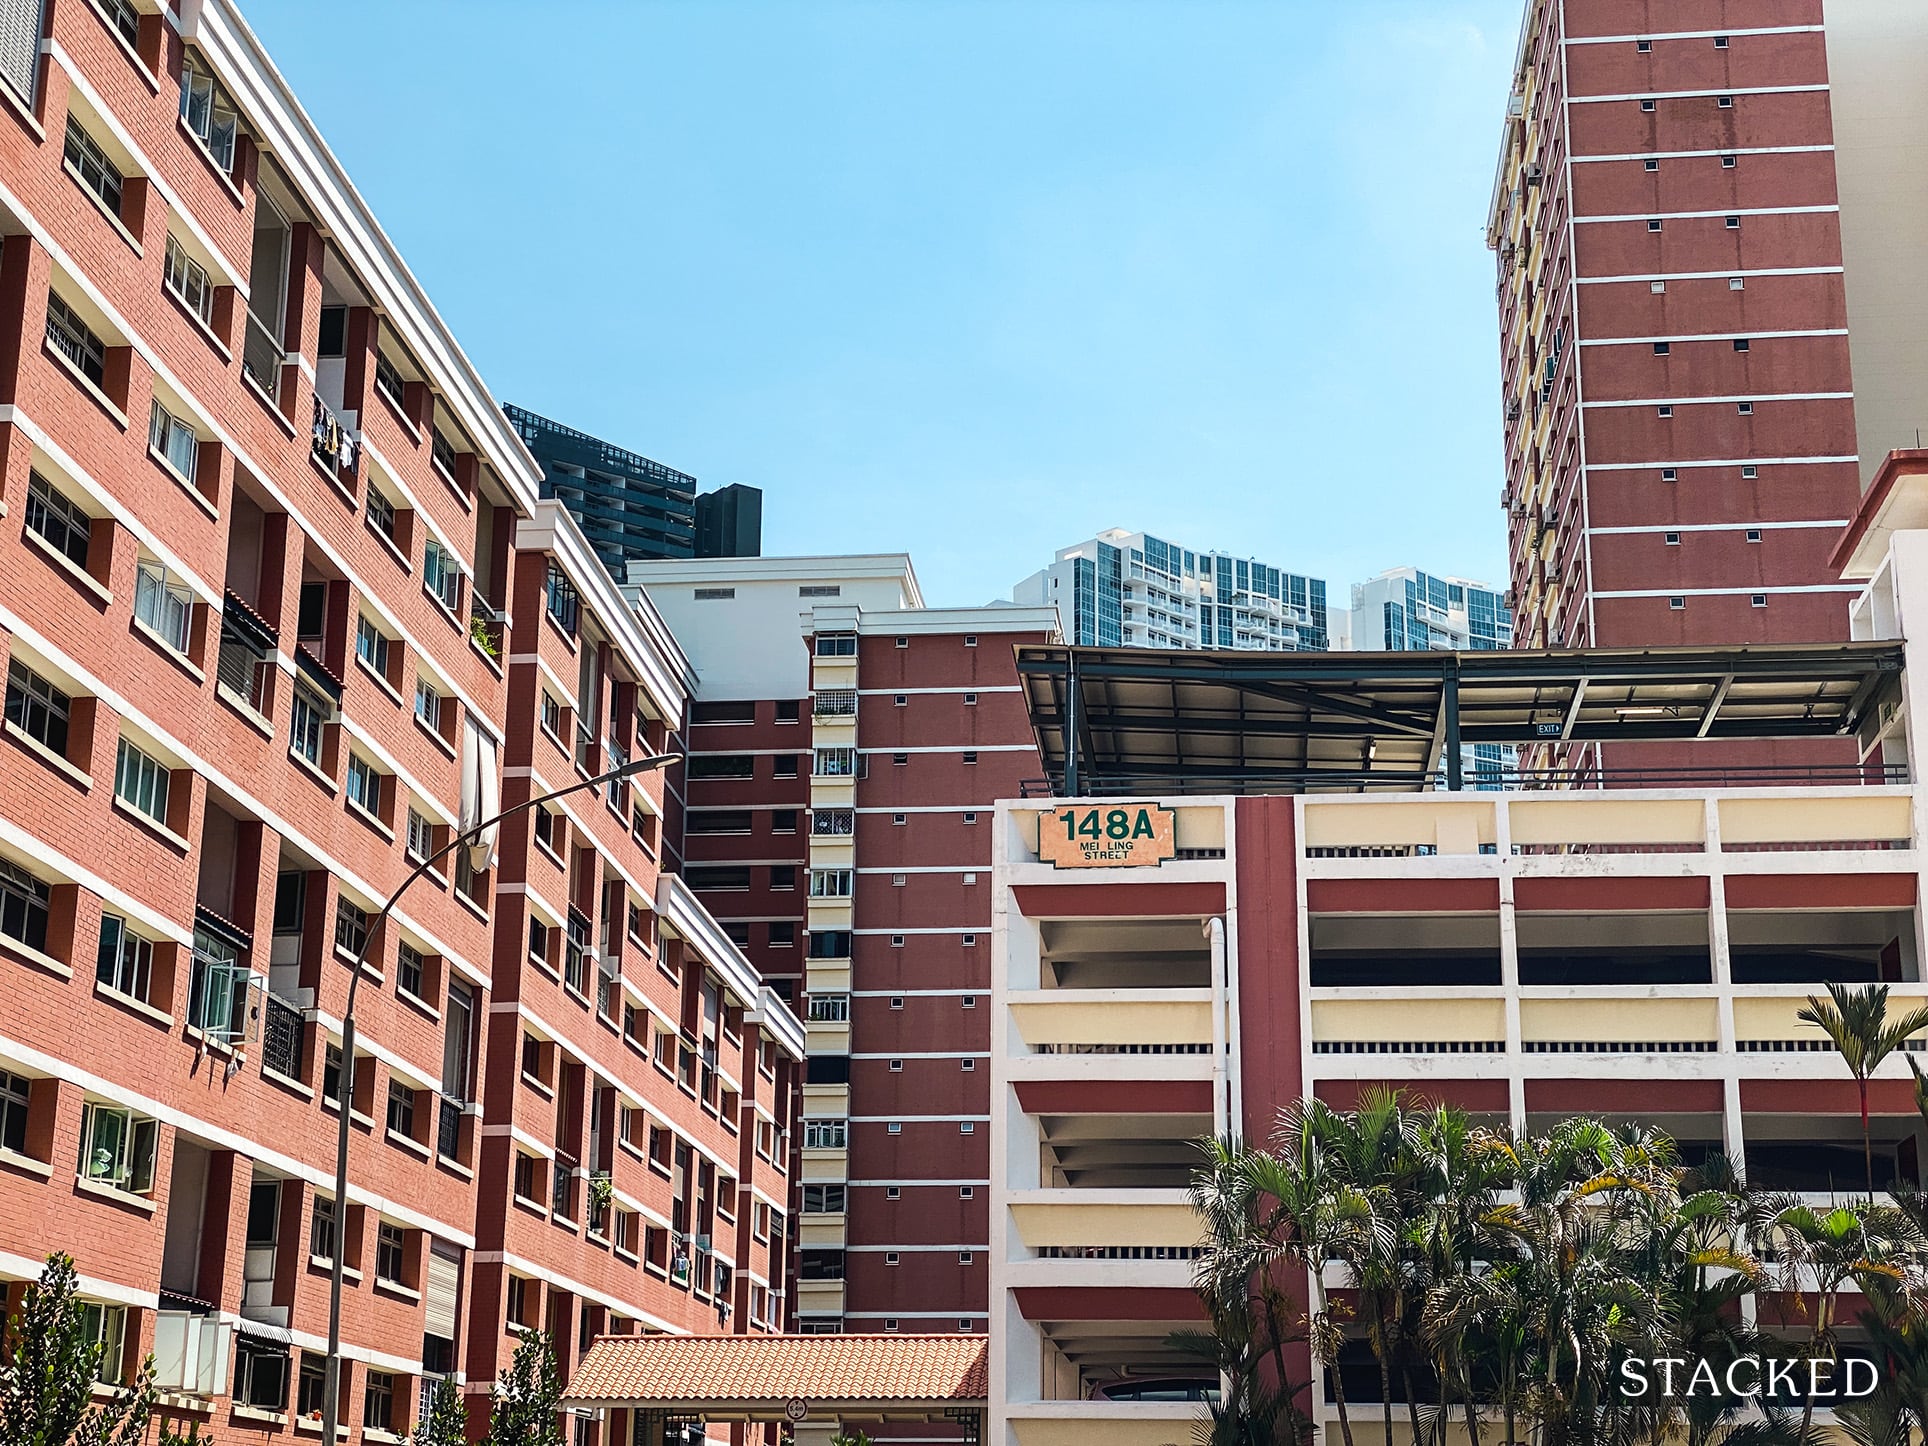 Should We Upgrade To A Bigger But Older HDB Or Wait For An EC?